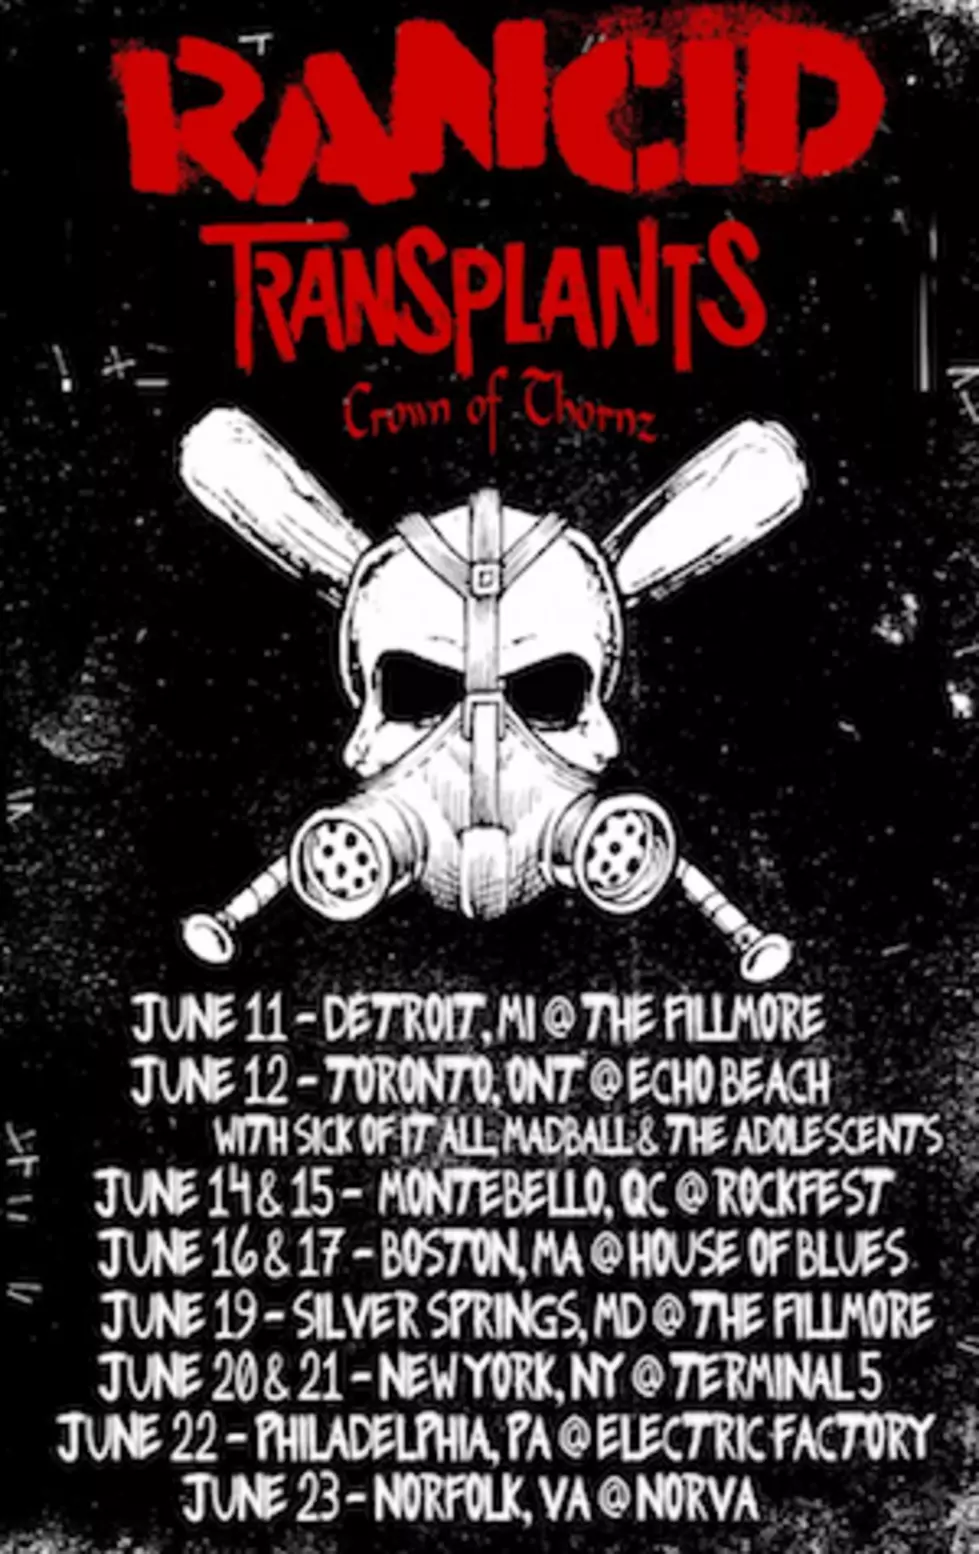 Rancid To Embark on 2013 North American Tour With Transplants in June